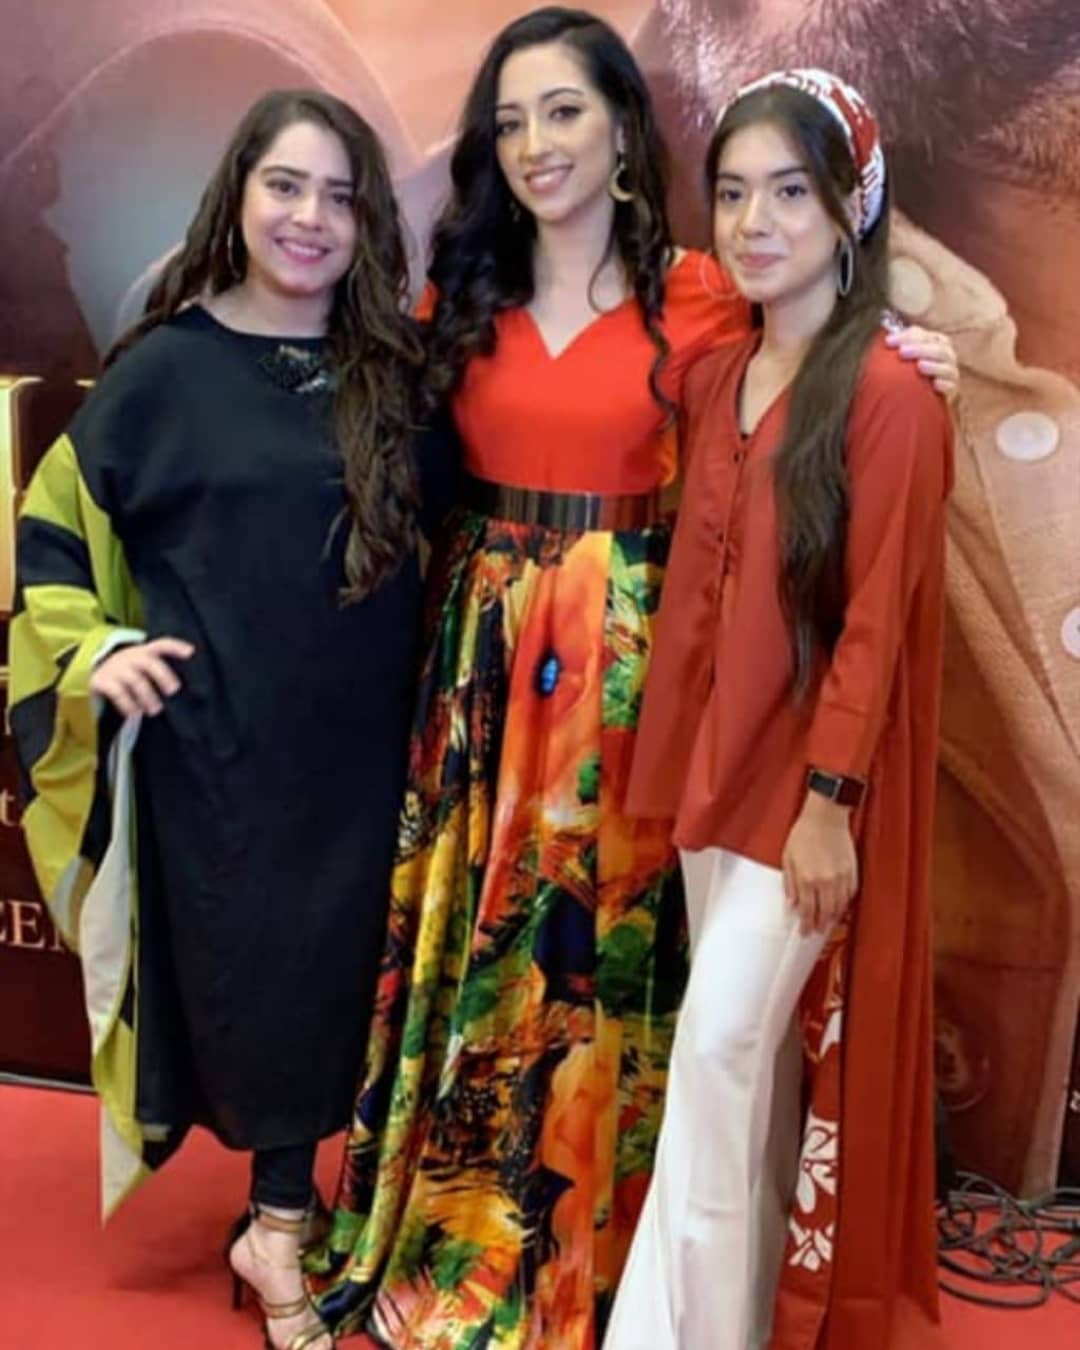 Beautiful Celebrities at the Trailer Launch of Upcoming Pakistani Movie Sacch